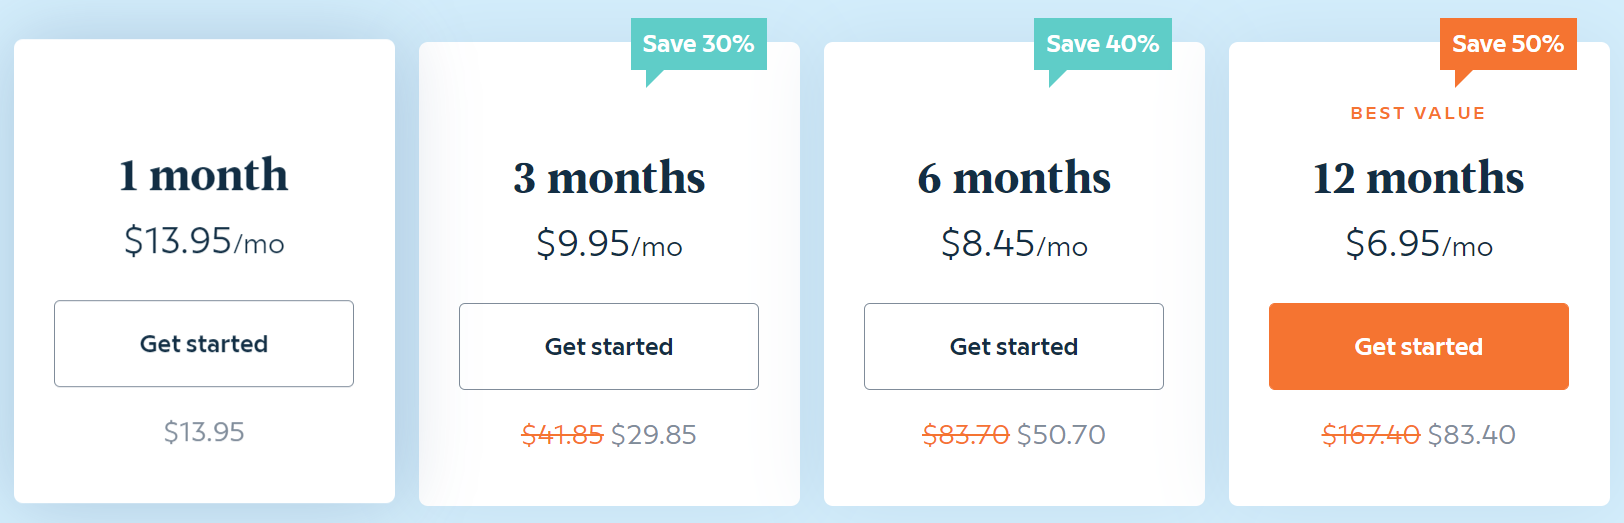 Screenshot showing the various Babbel subscription prices.